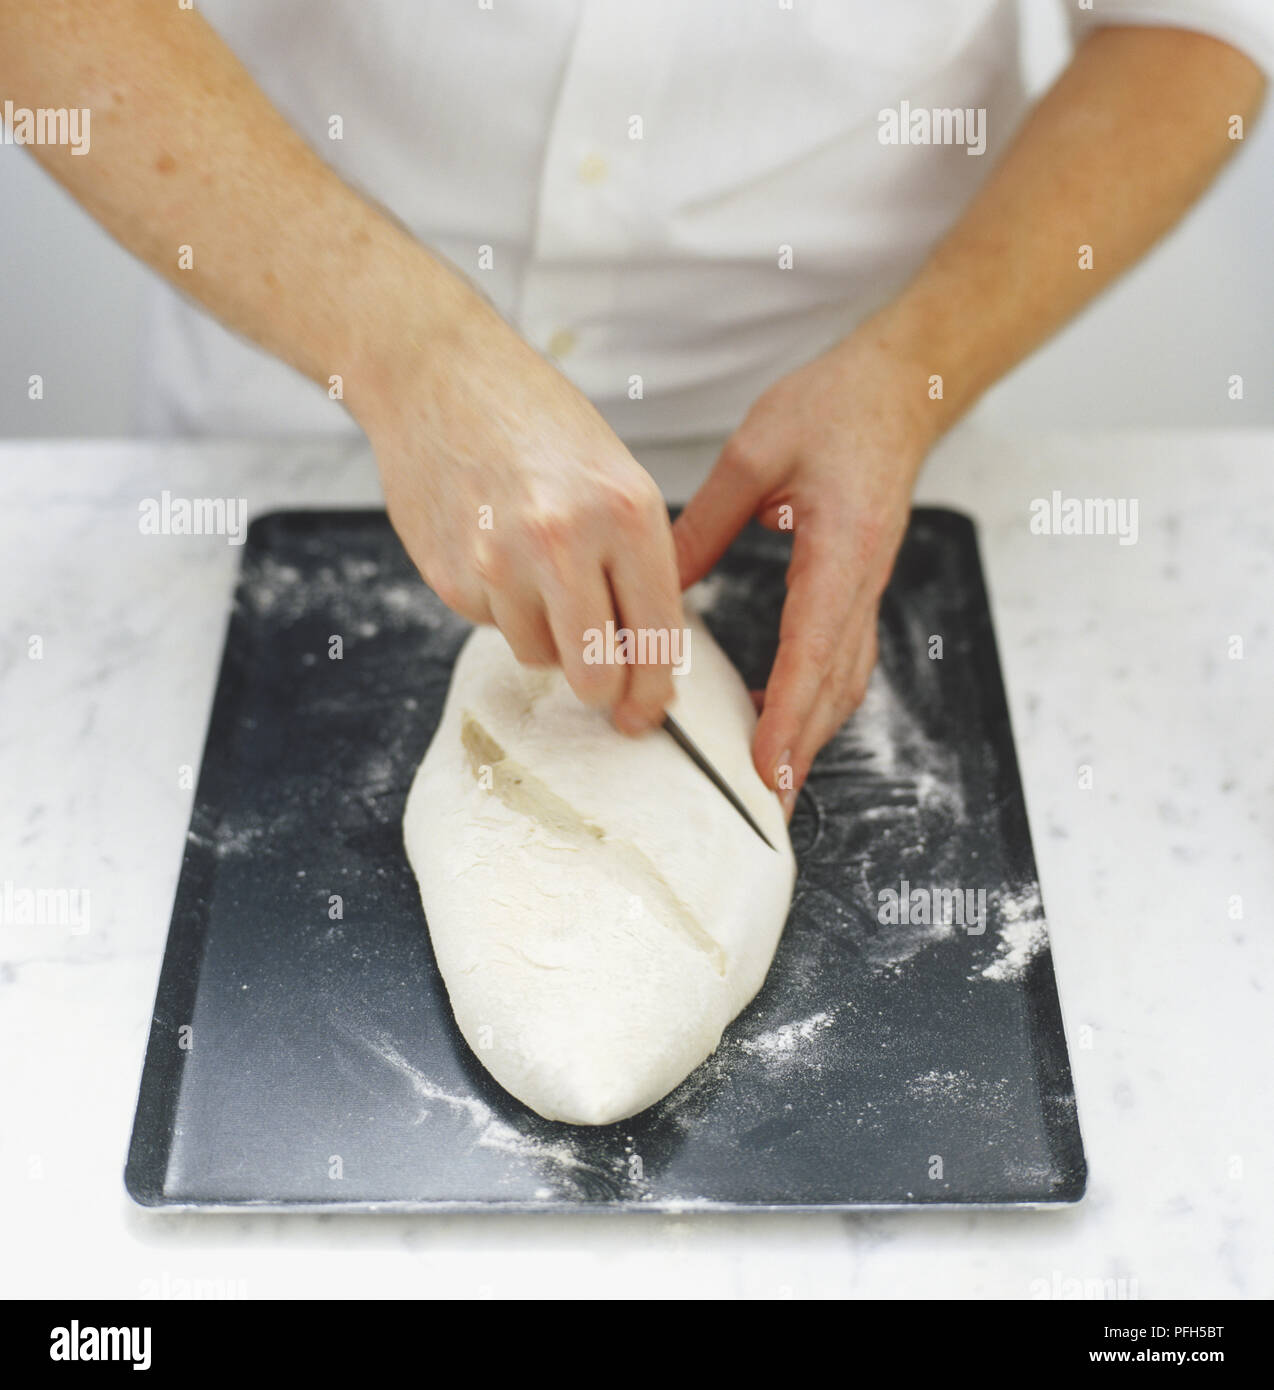 Slashing the upper surface of a bread dough Stock Photo